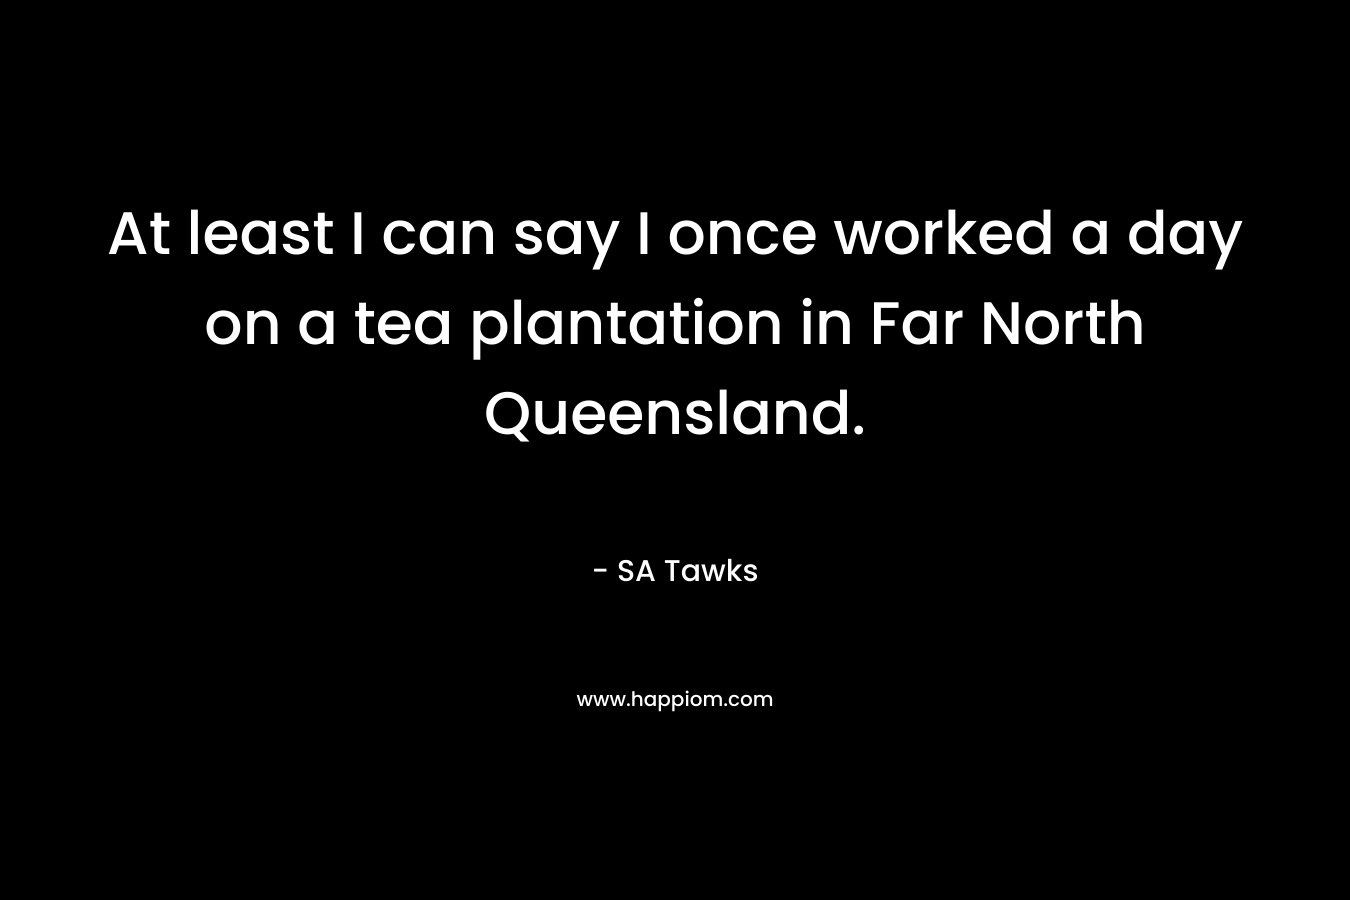 At least I can say I once worked a day on a tea plantation in Far North Queensland. – SA Tawks